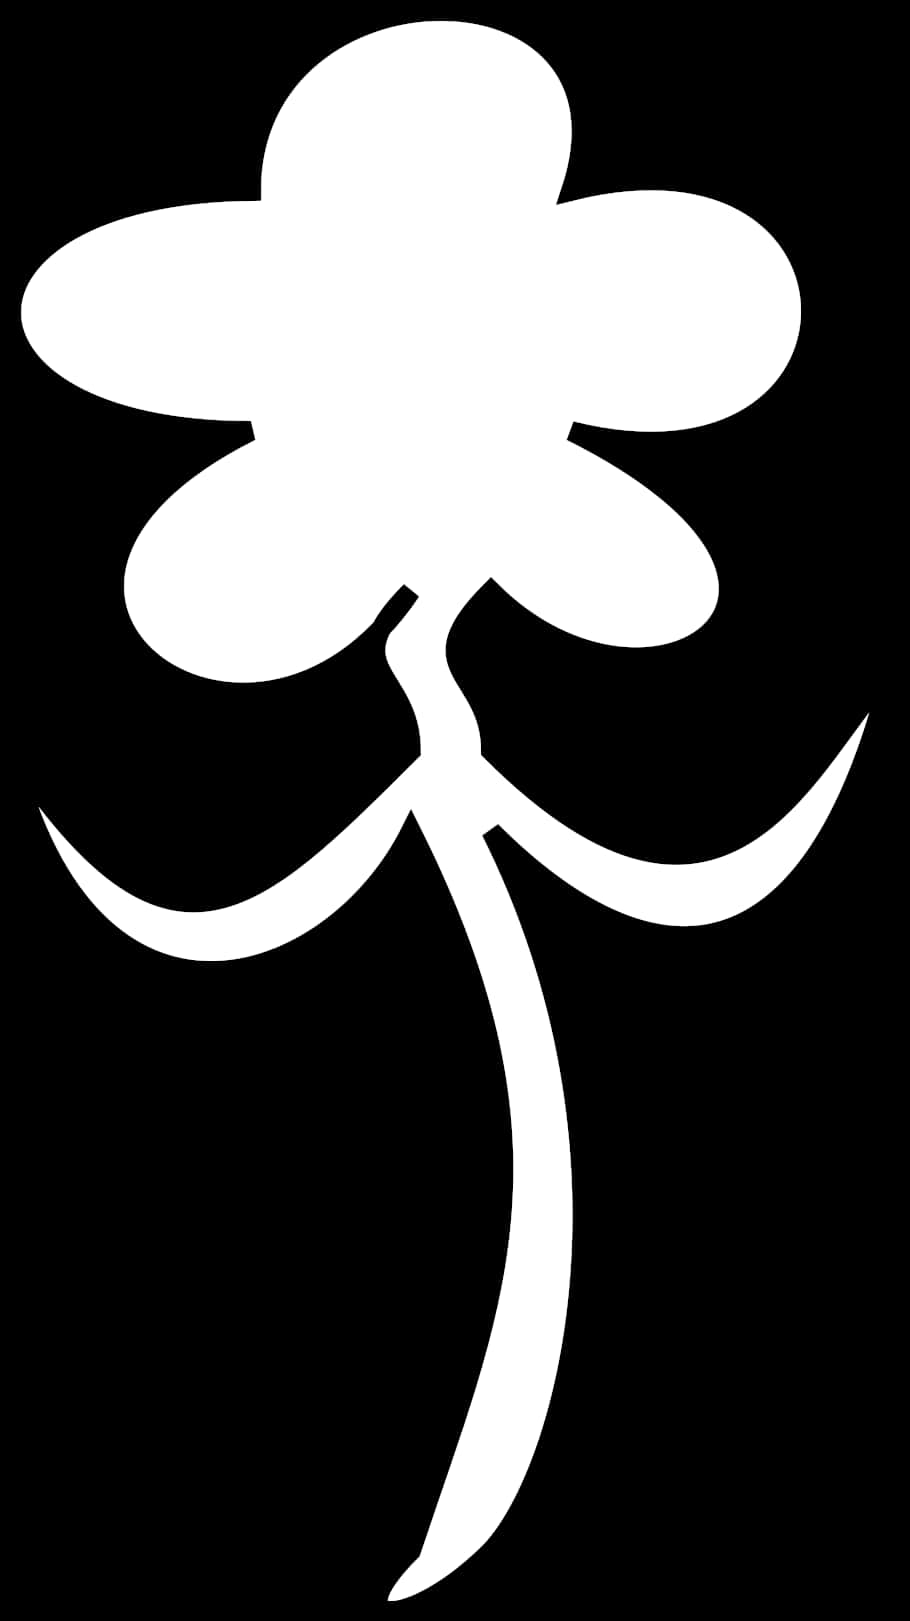 Abstract Flower Blackand White Graphic PNG